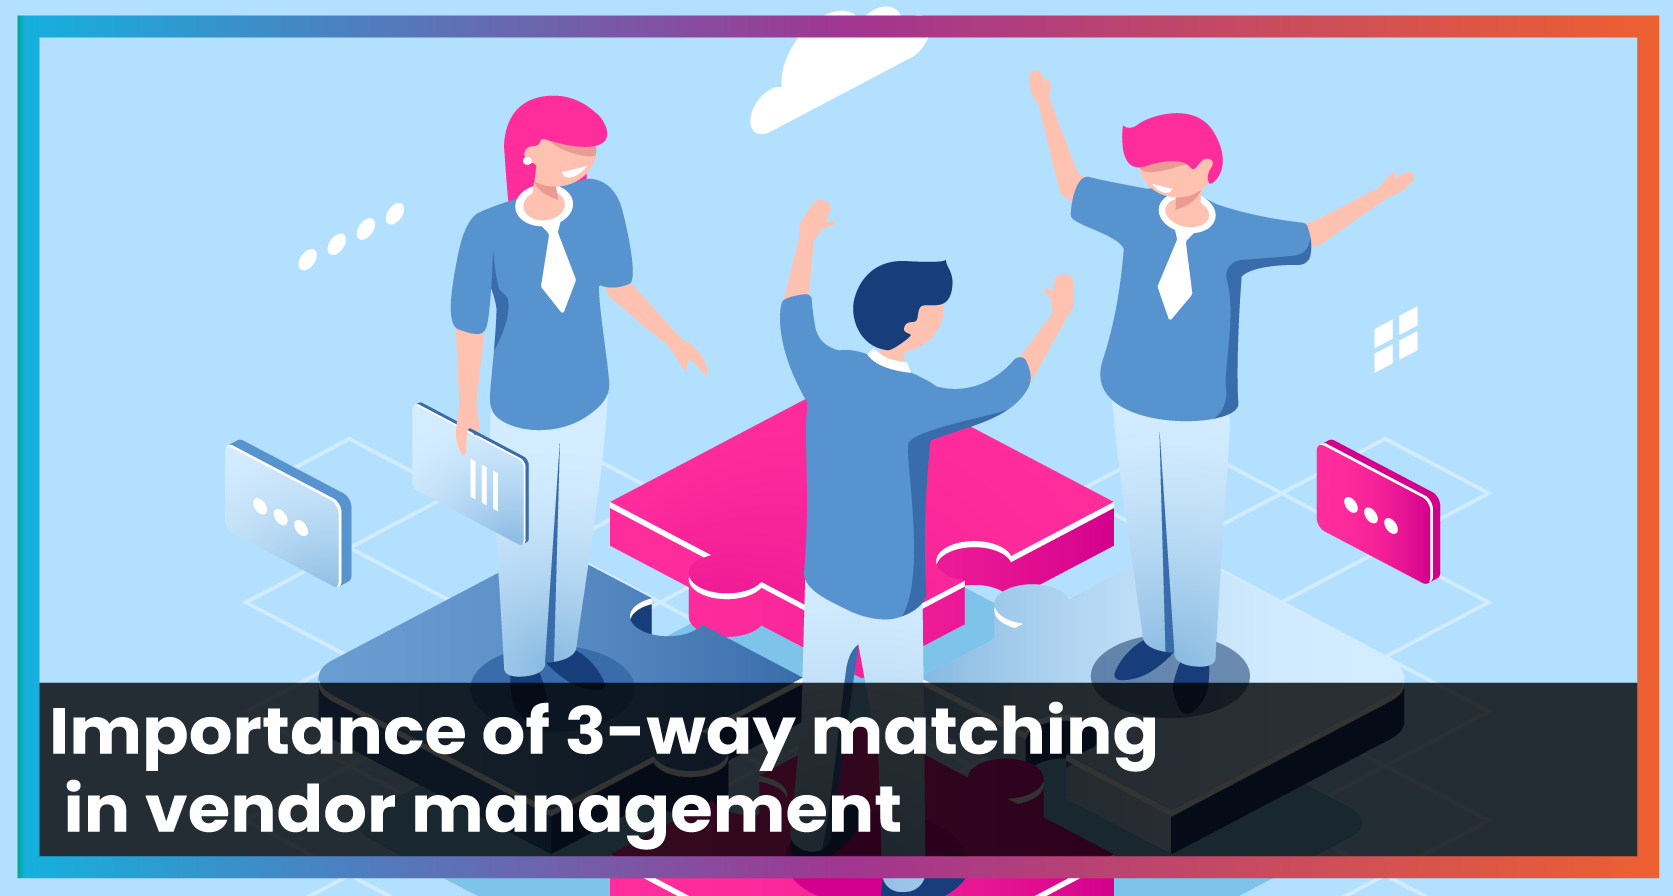 Importance of 3-way matching in vendor management